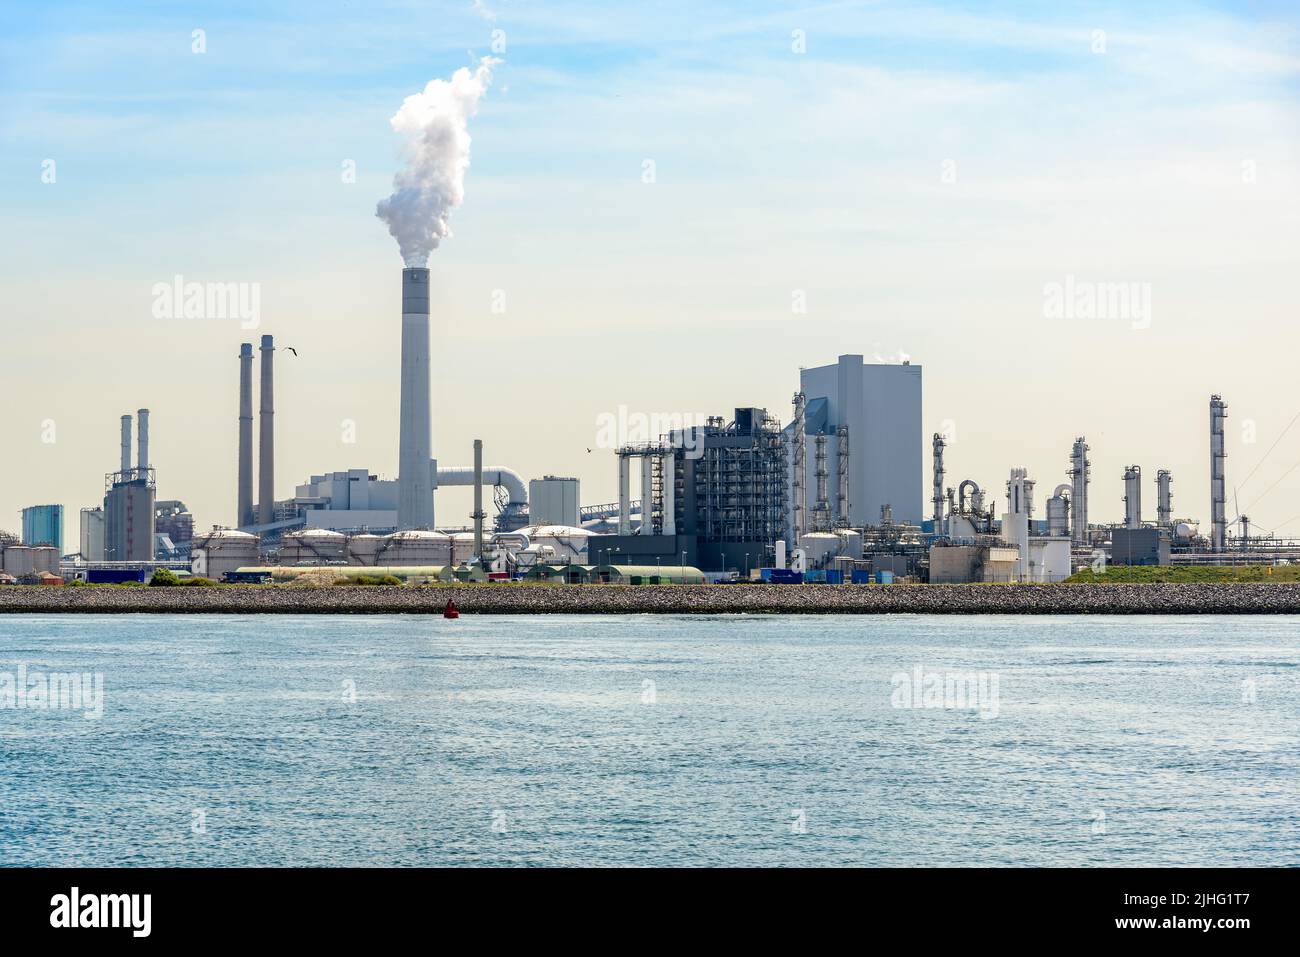 View of a harbourside oil refinery on a sunny summer day Stock Photo